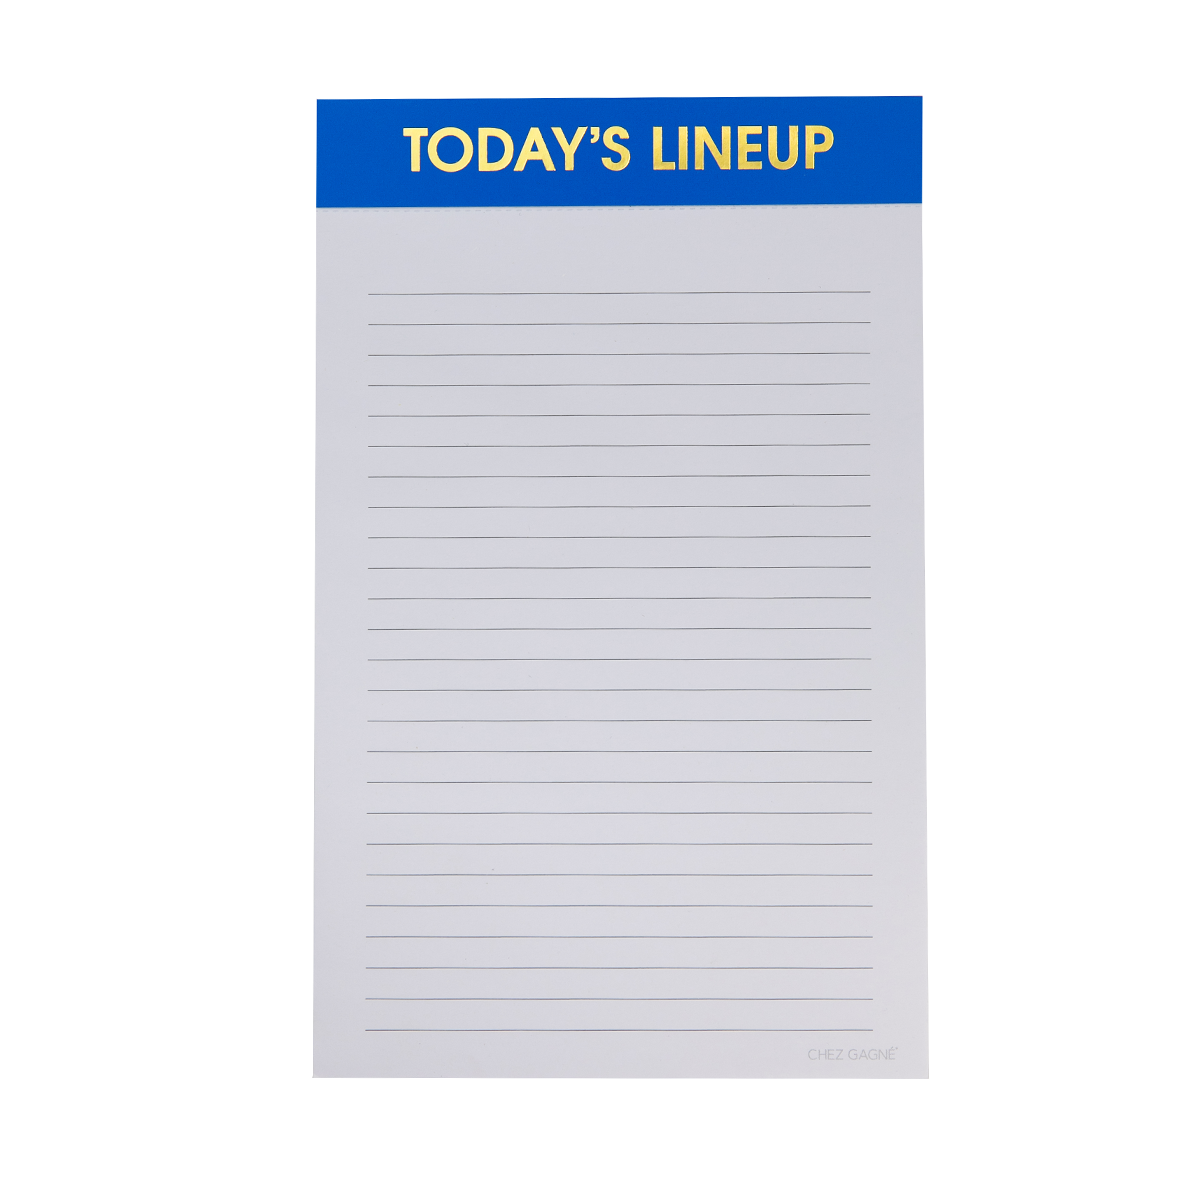 Today's Line Up - Lined Notepad